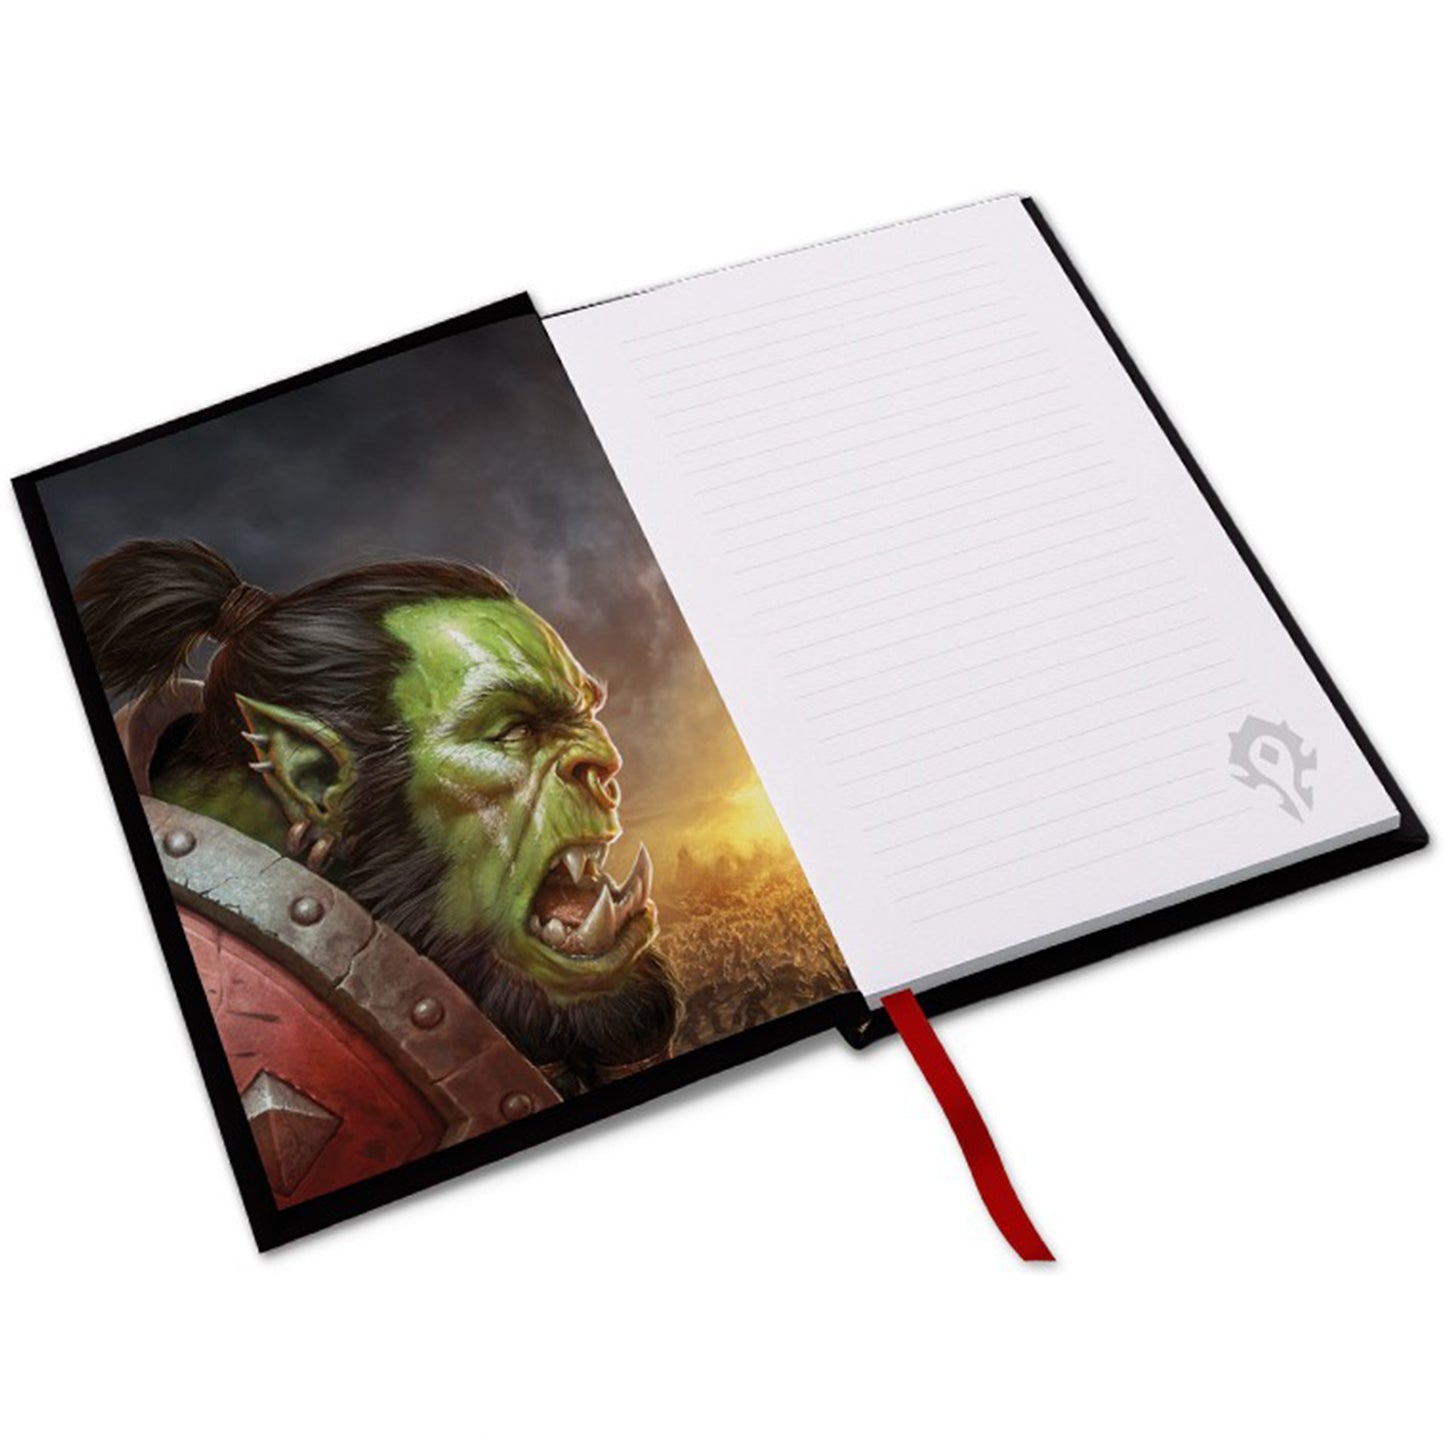 World of Warcraft For The Horde Notebook Inside Cover Design | Happy Piranha